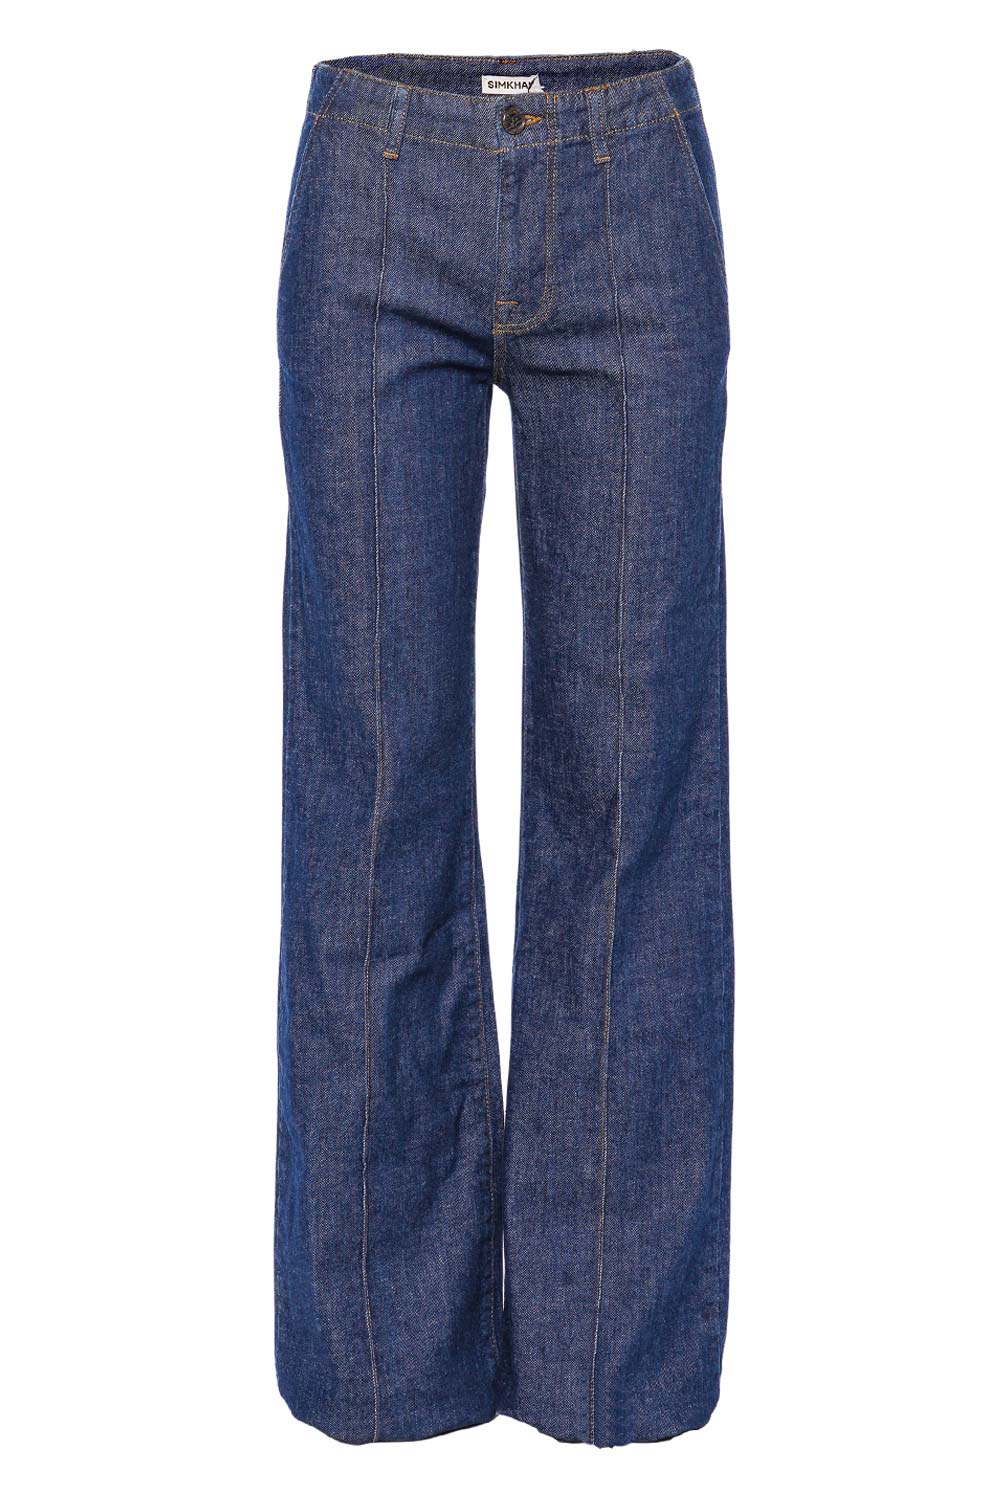 SIMKHAI Ansel Imperial High Rise Flare Jeans